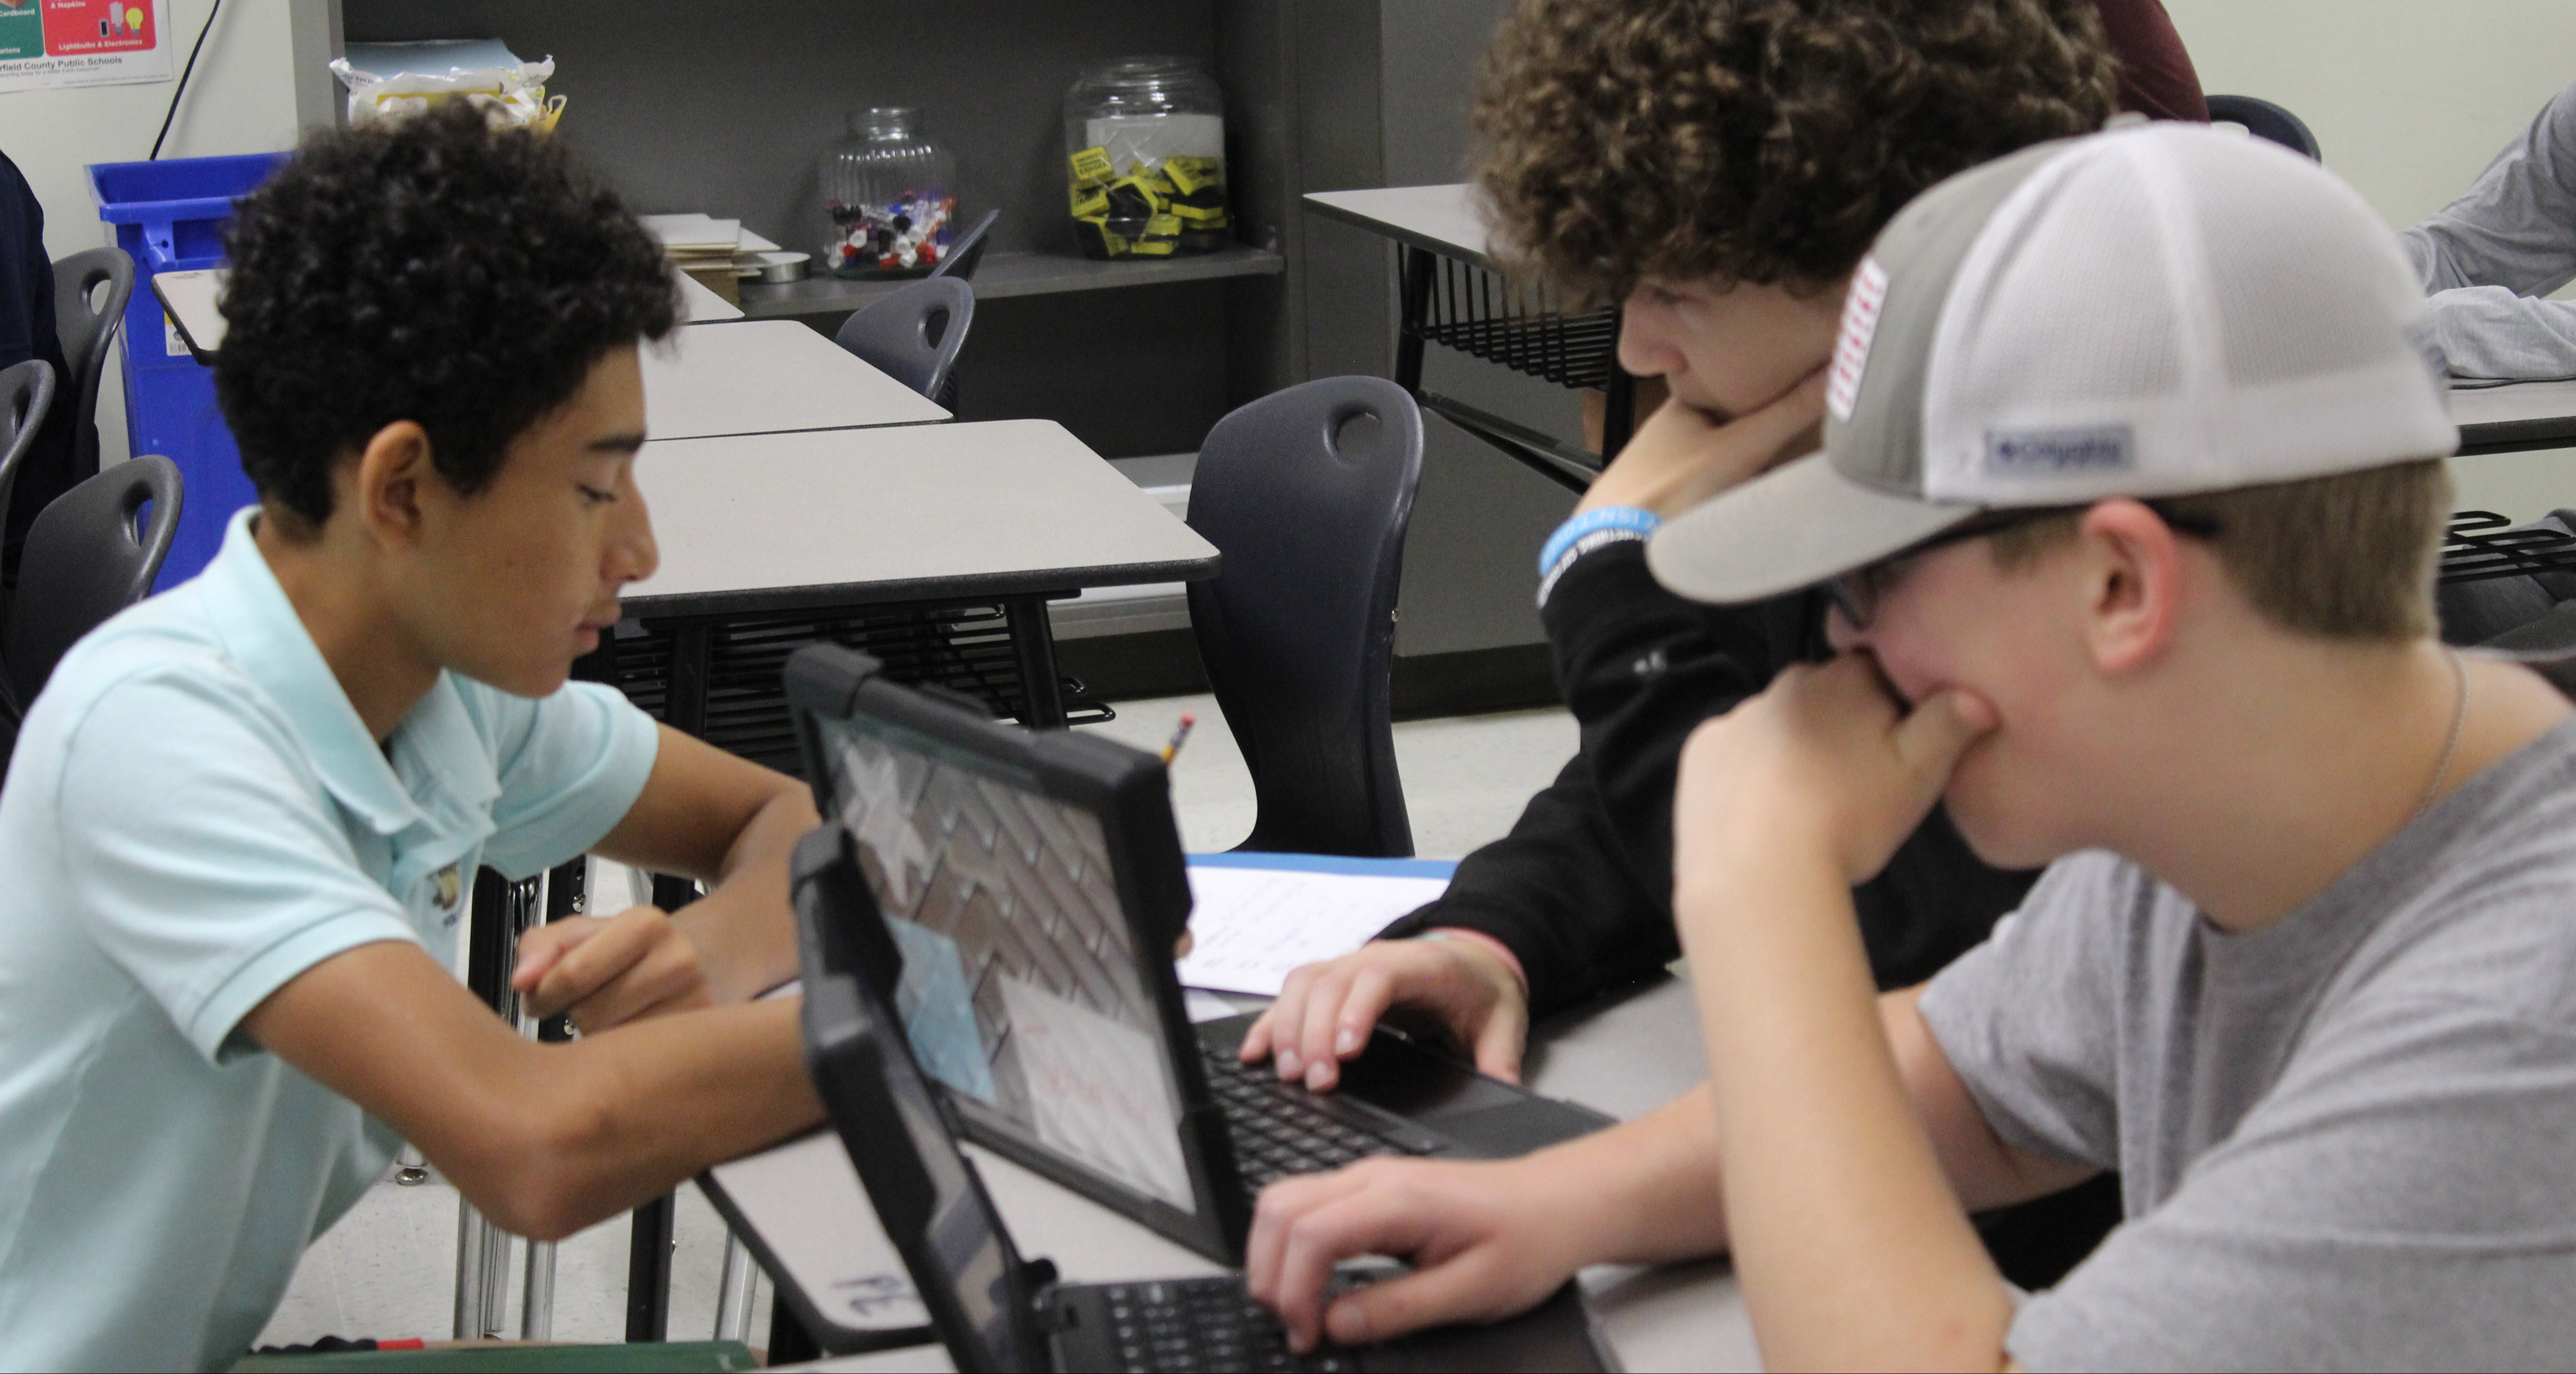 Three students focused in class and working on their laptops